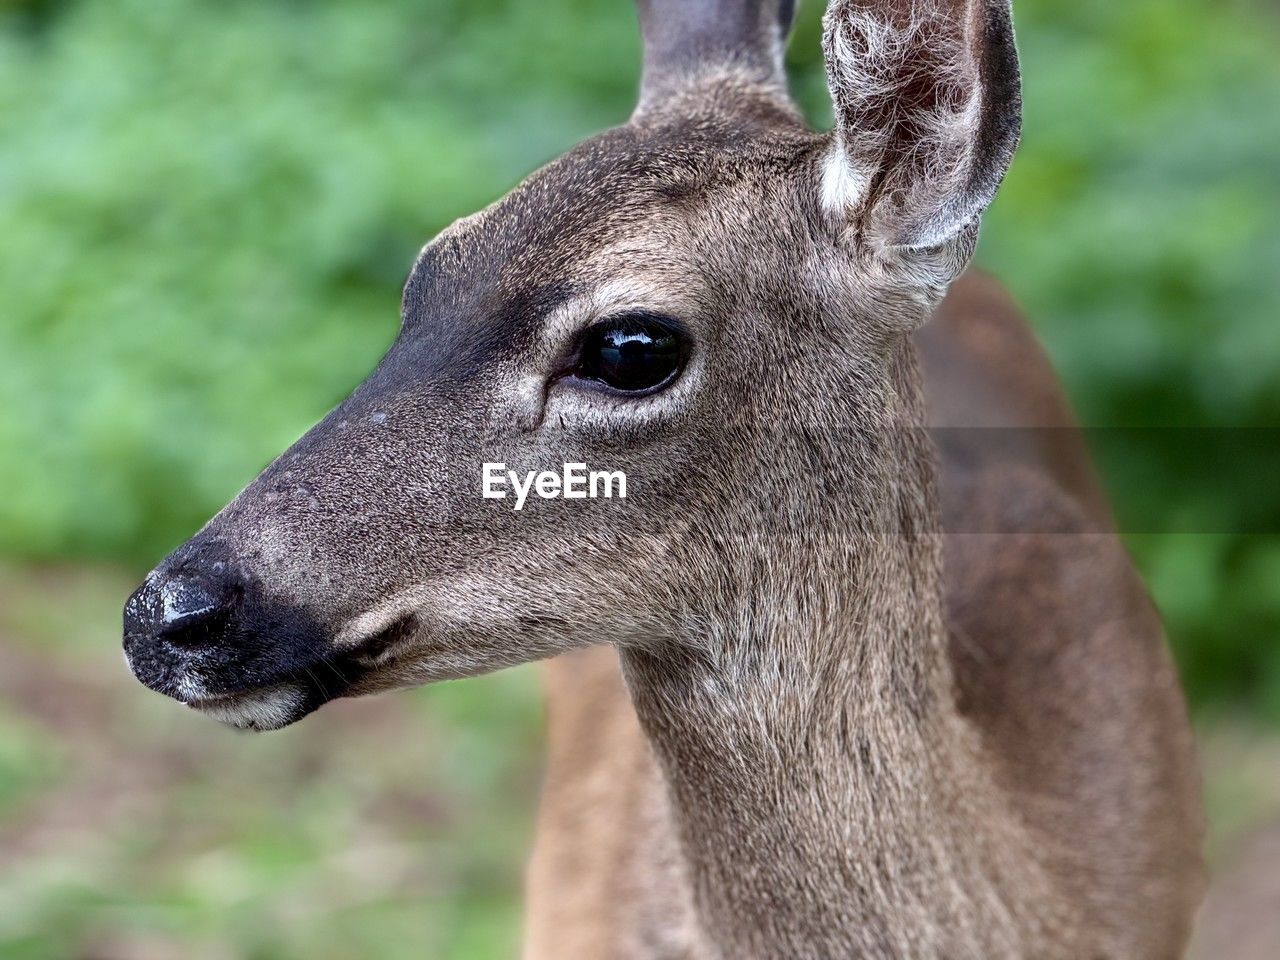 animal themes, animal, animal wildlife, one animal, deer, wildlife, mammal, portrait, animal head, focus on foreground, animal body part, close-up, no people, nature, side view, outdoors, day, brown